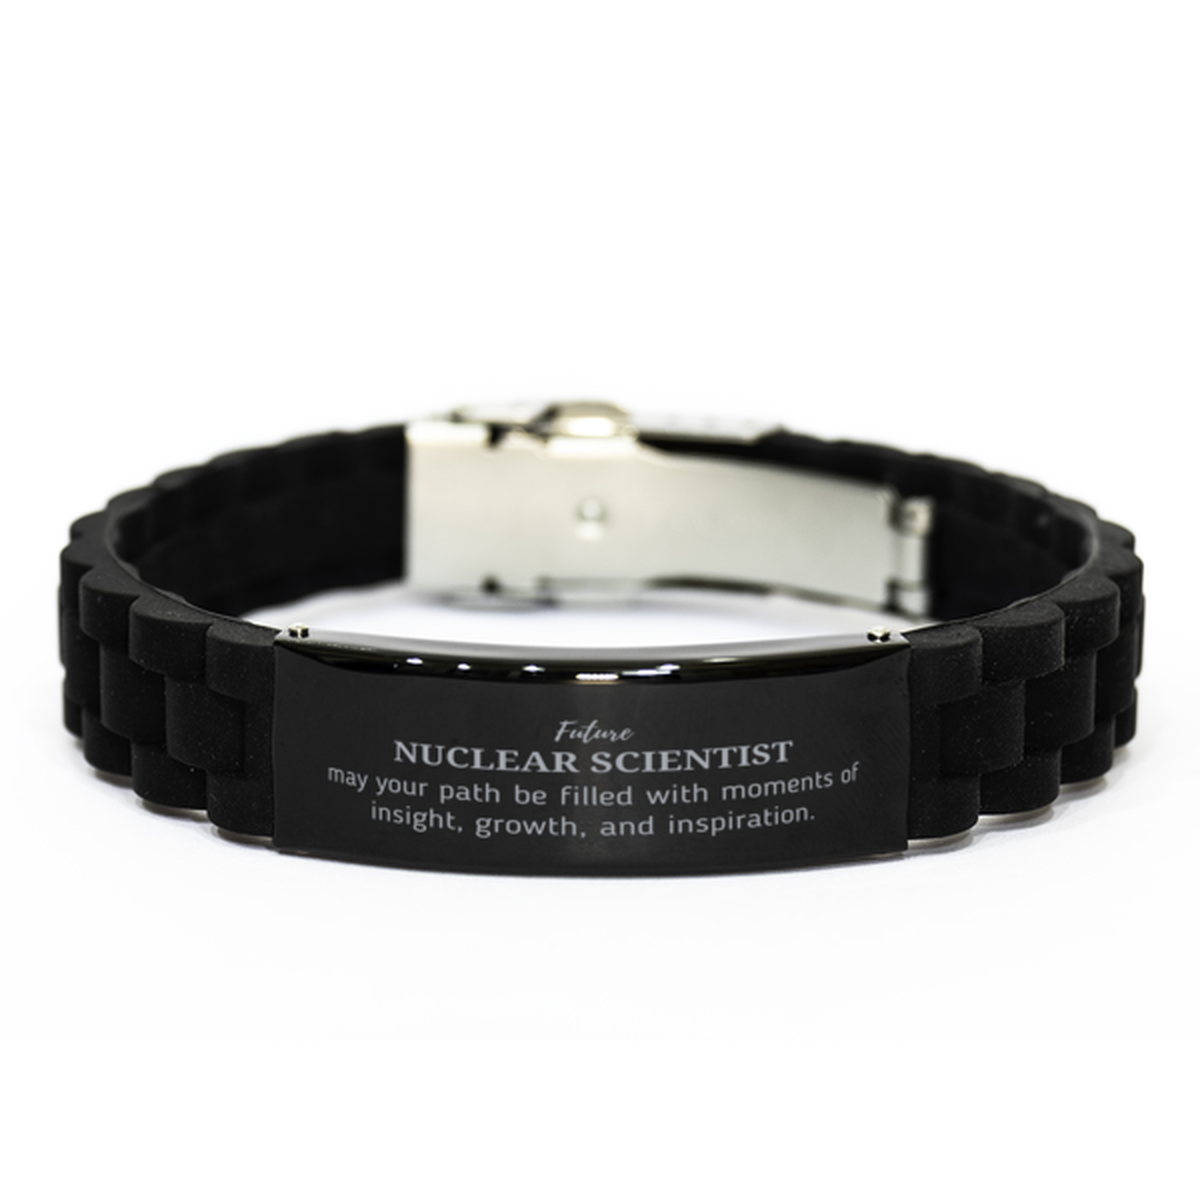 Future Nuclear Scientist Gifts, May your path be filled with moments of insight, Graduation Gifts for New Nuclear Scientist, Christmas Unique Black Glidelock Clasp Bracelet For Men, Women, Friends